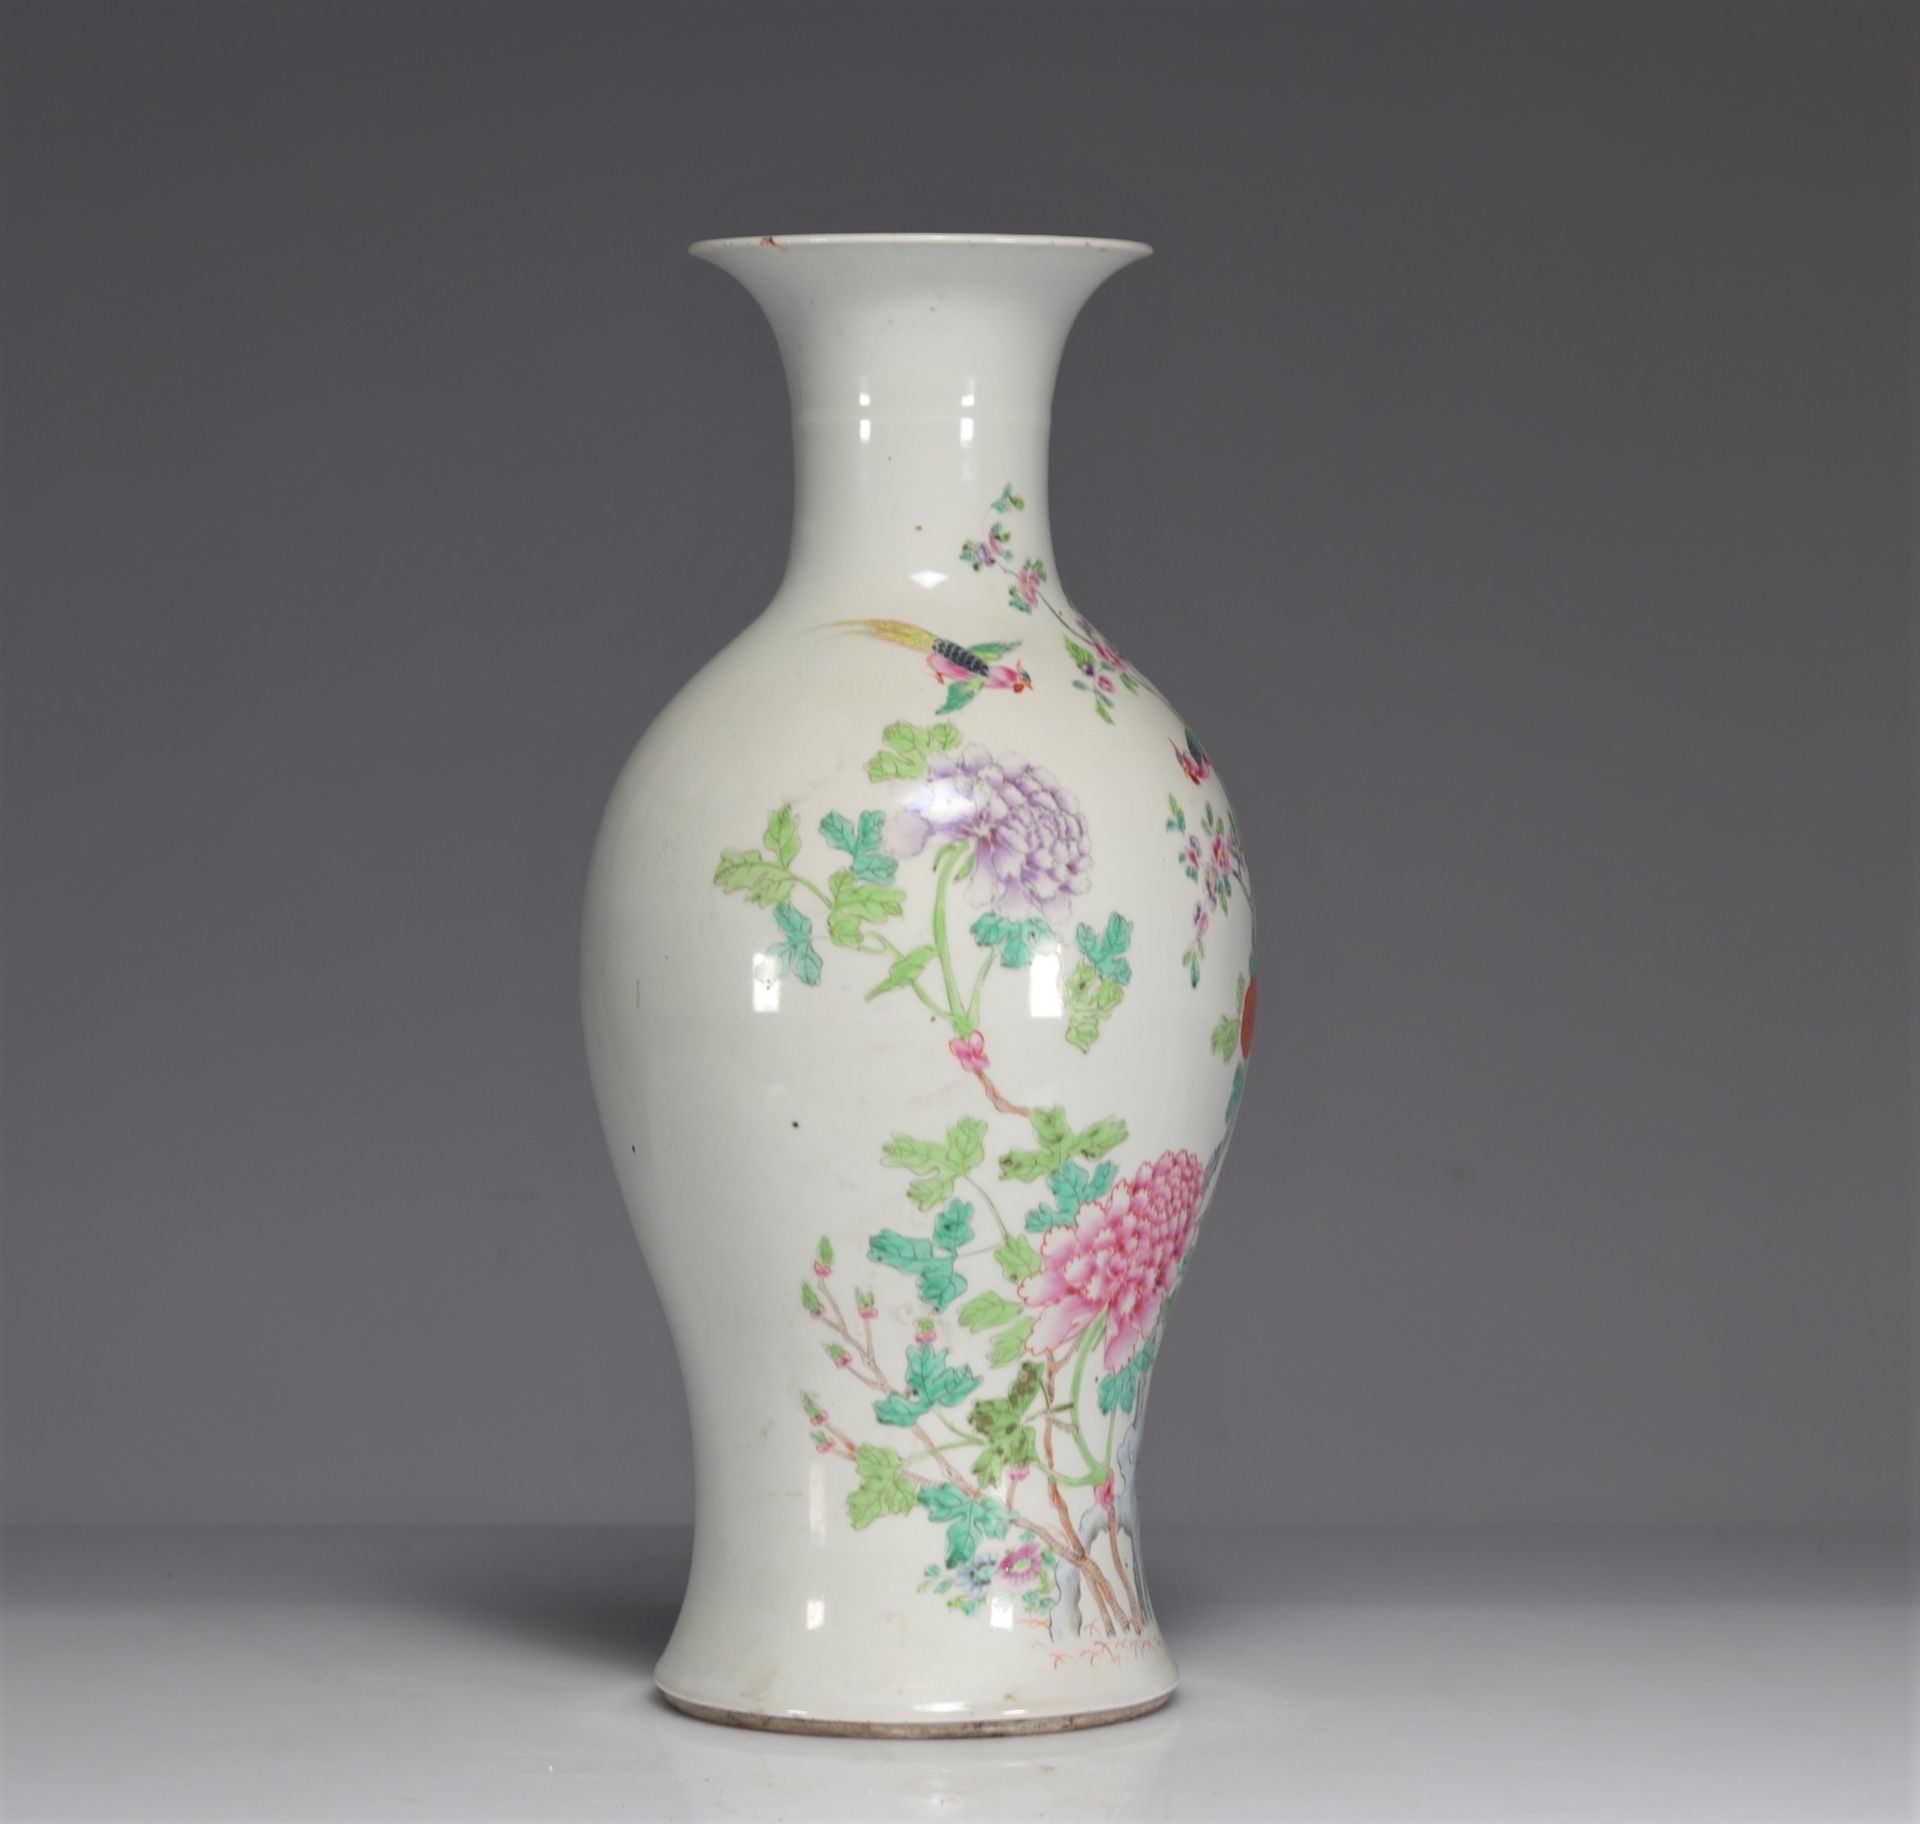 Famille rose porcelain vase decorated with flowers and birds - Image 2 of 5